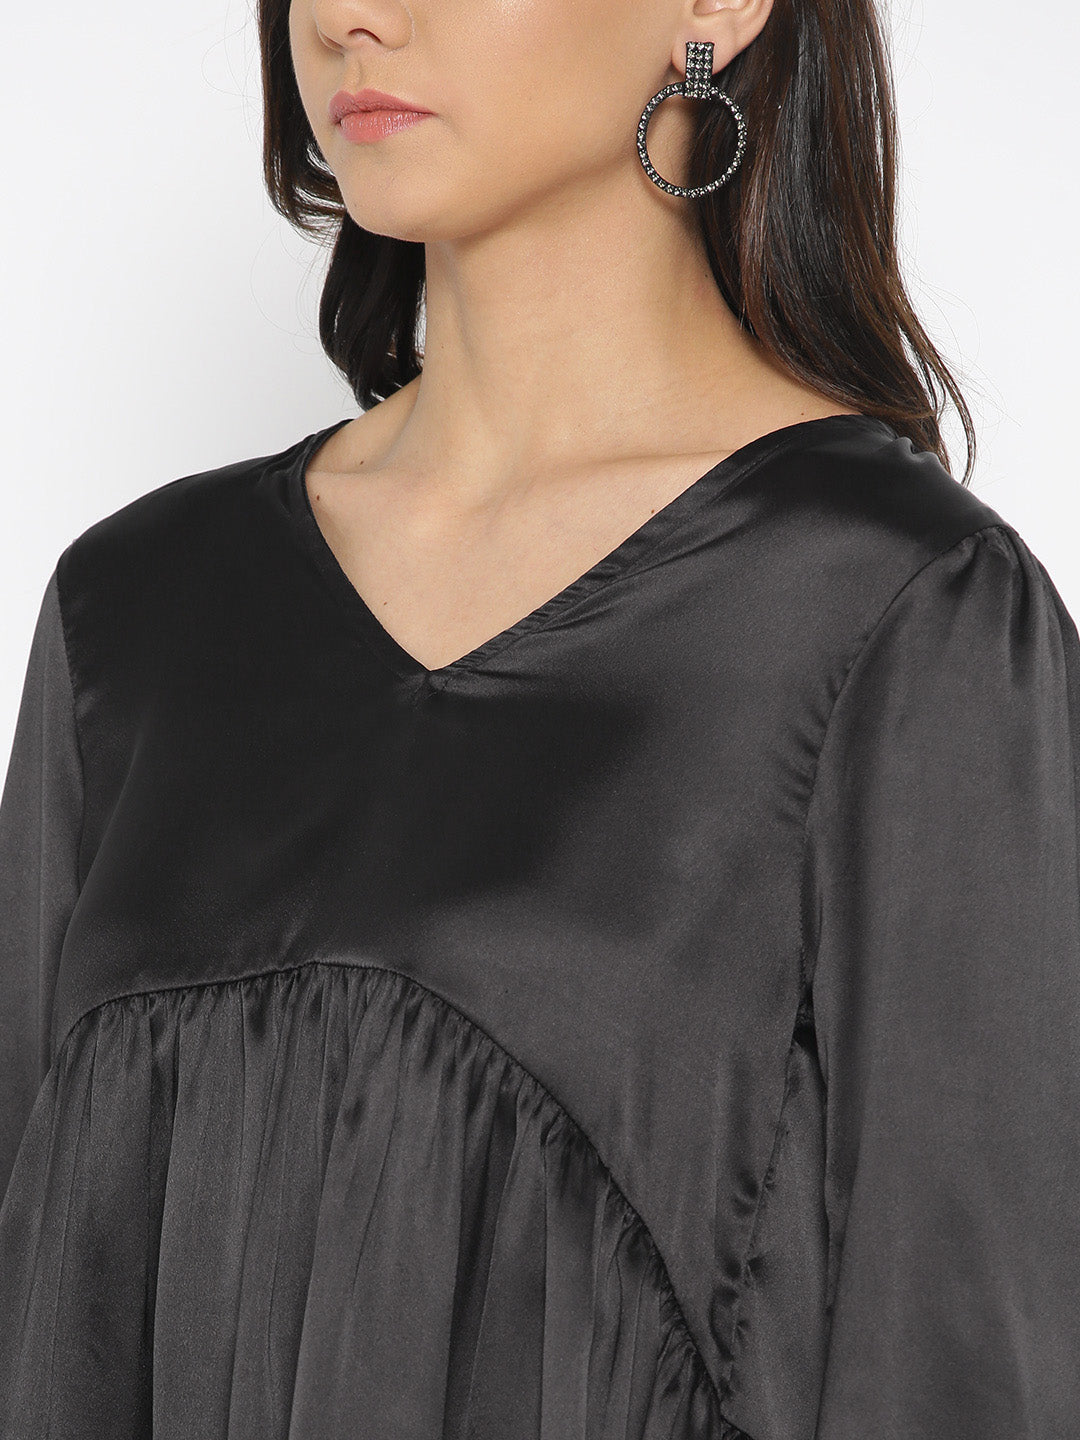 Women Black Solid Satin Finish A-Line Top